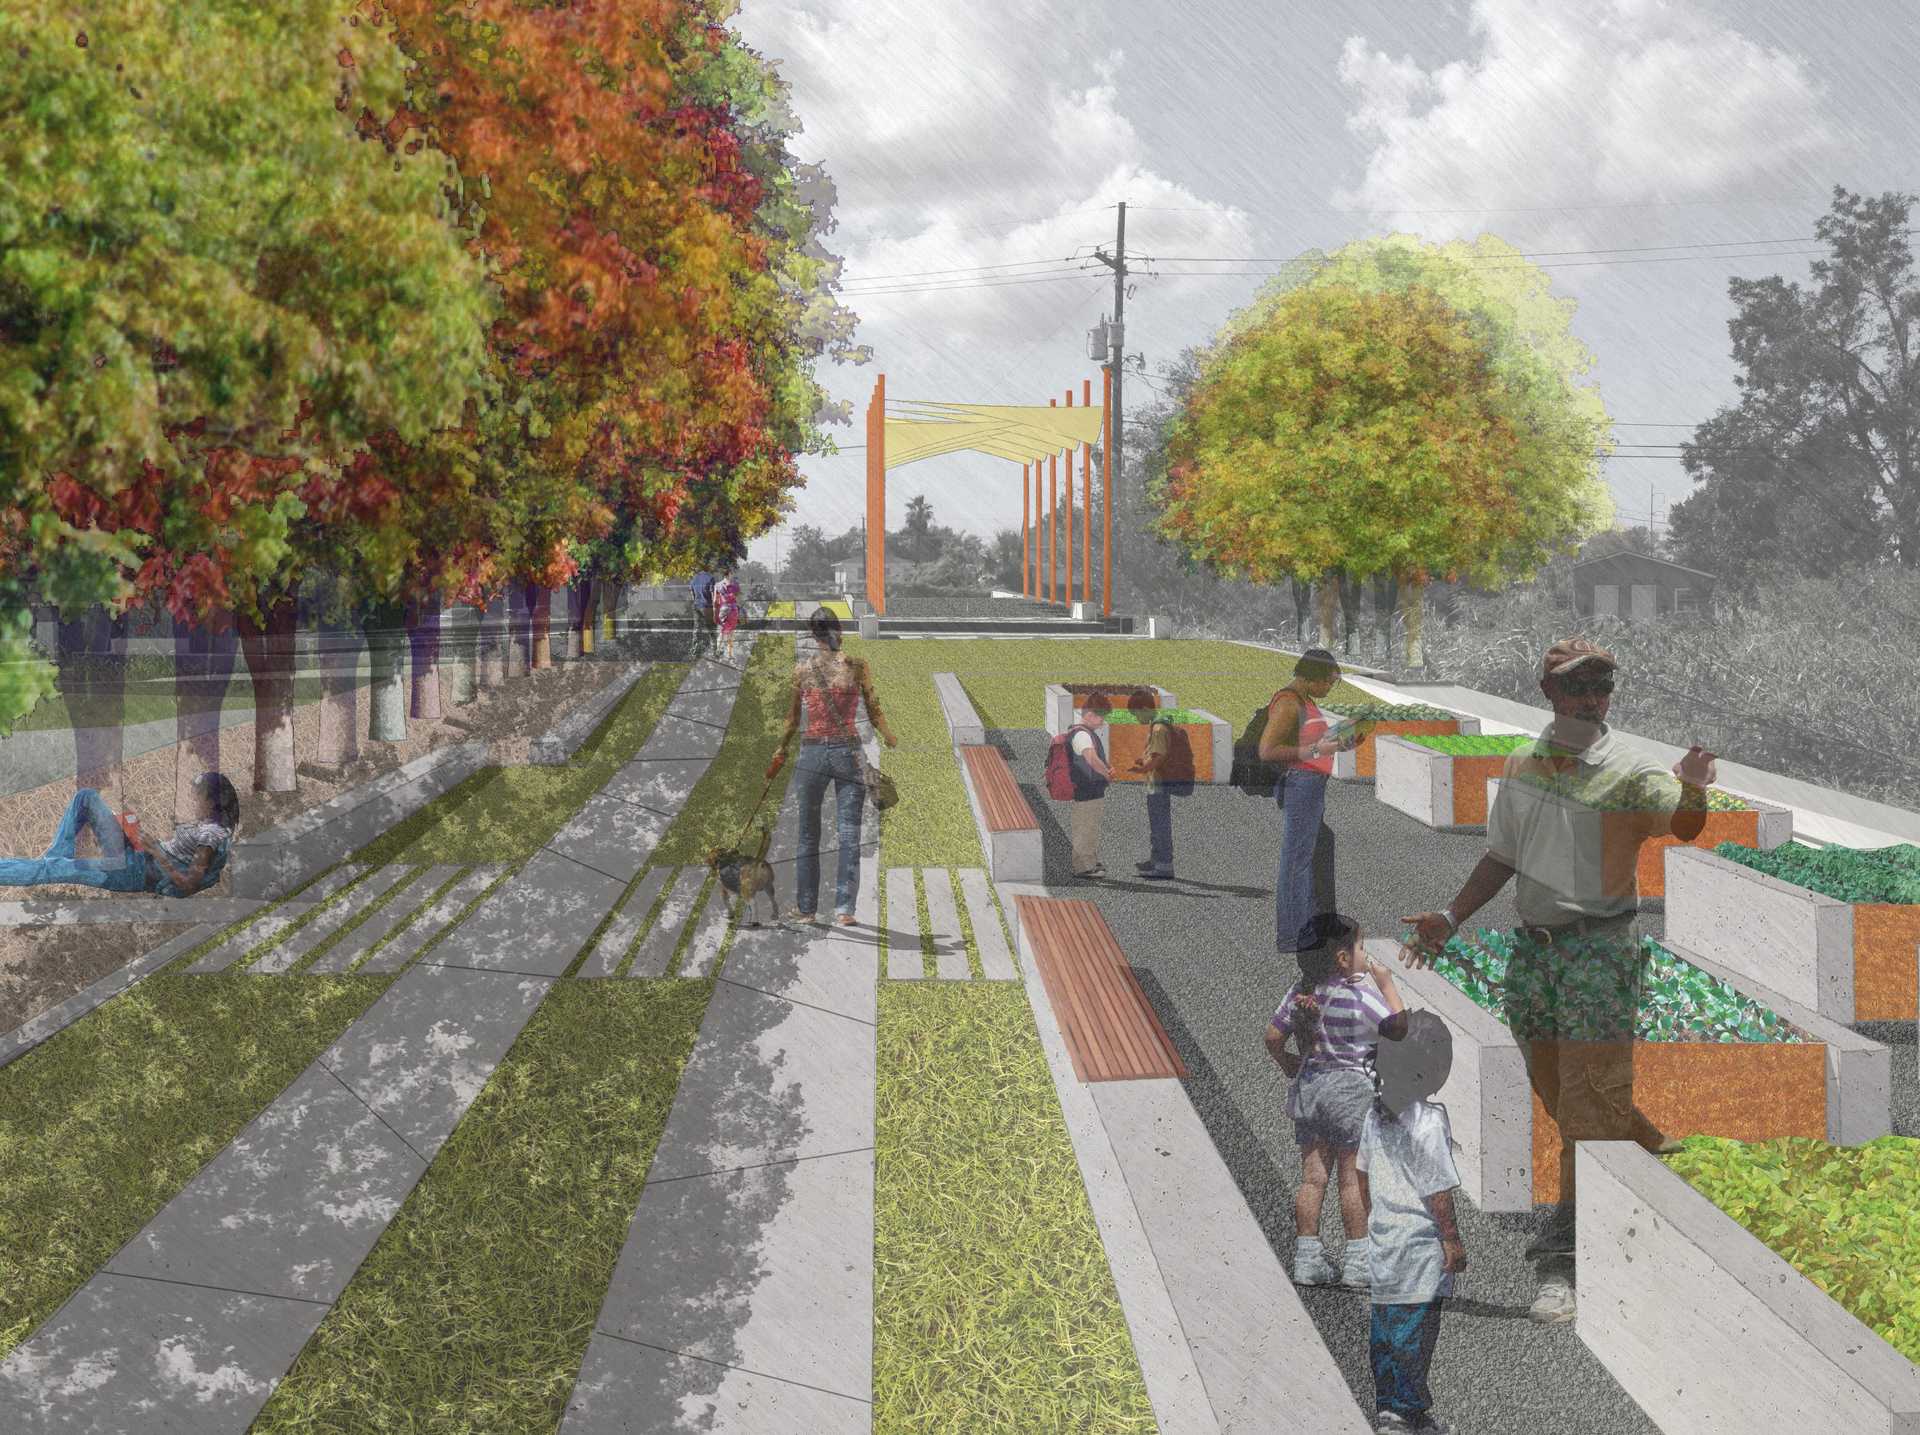 Prospective snapshot of Hollygrove, displaying people walking in the center with a yellow canopy